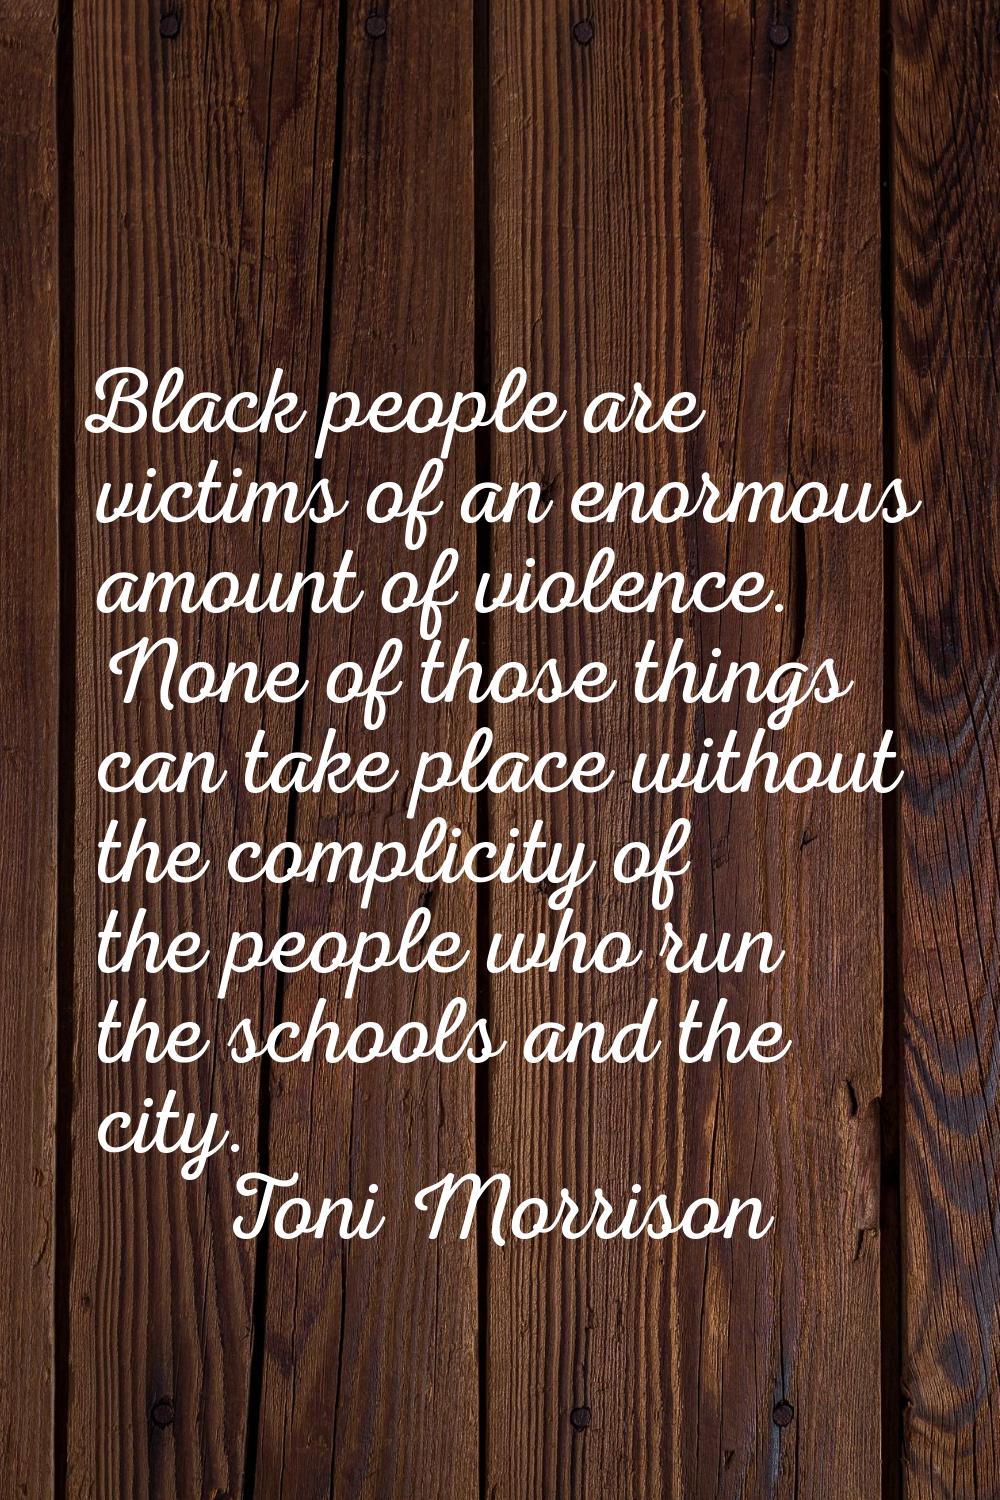 Black people are victims of an enormous amount of violence. None of those things can take place wit